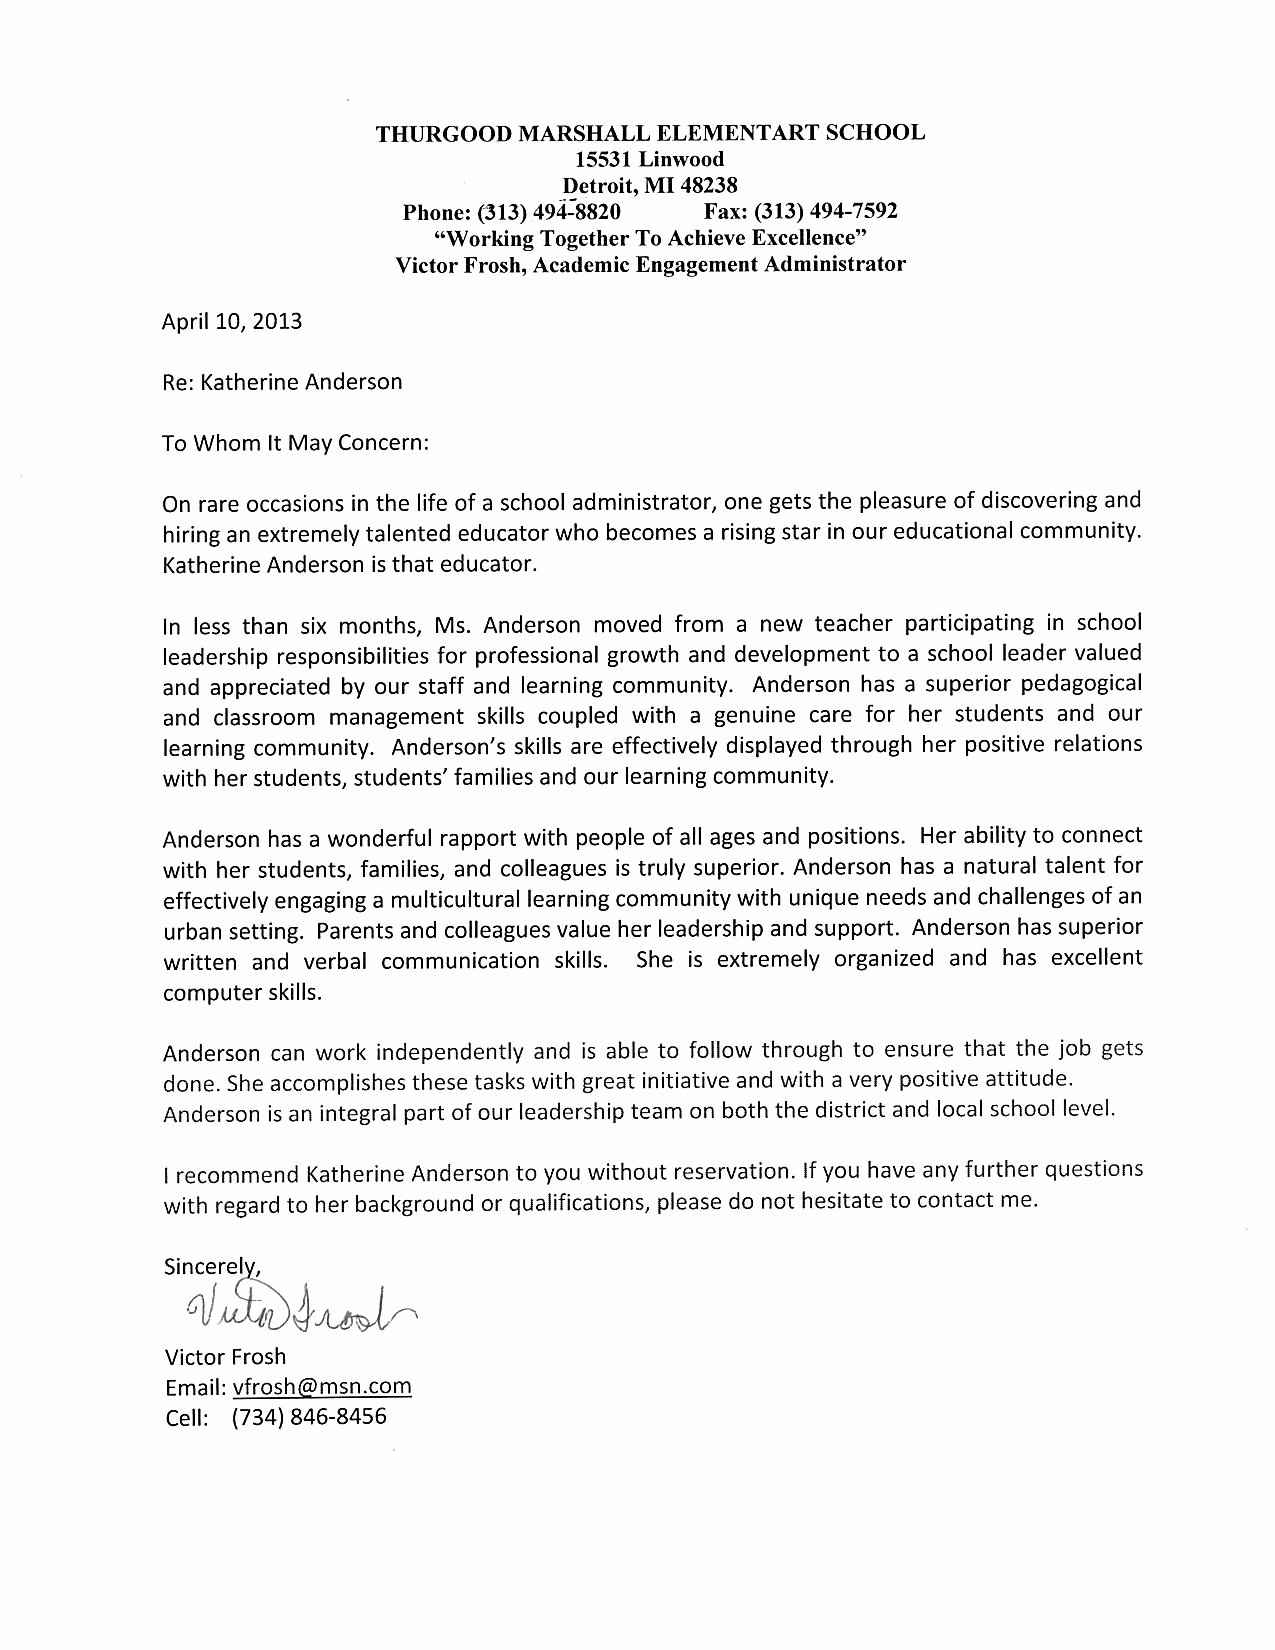 Grad School Letter Of Recommendation Best Of Letters Of Re Mendation